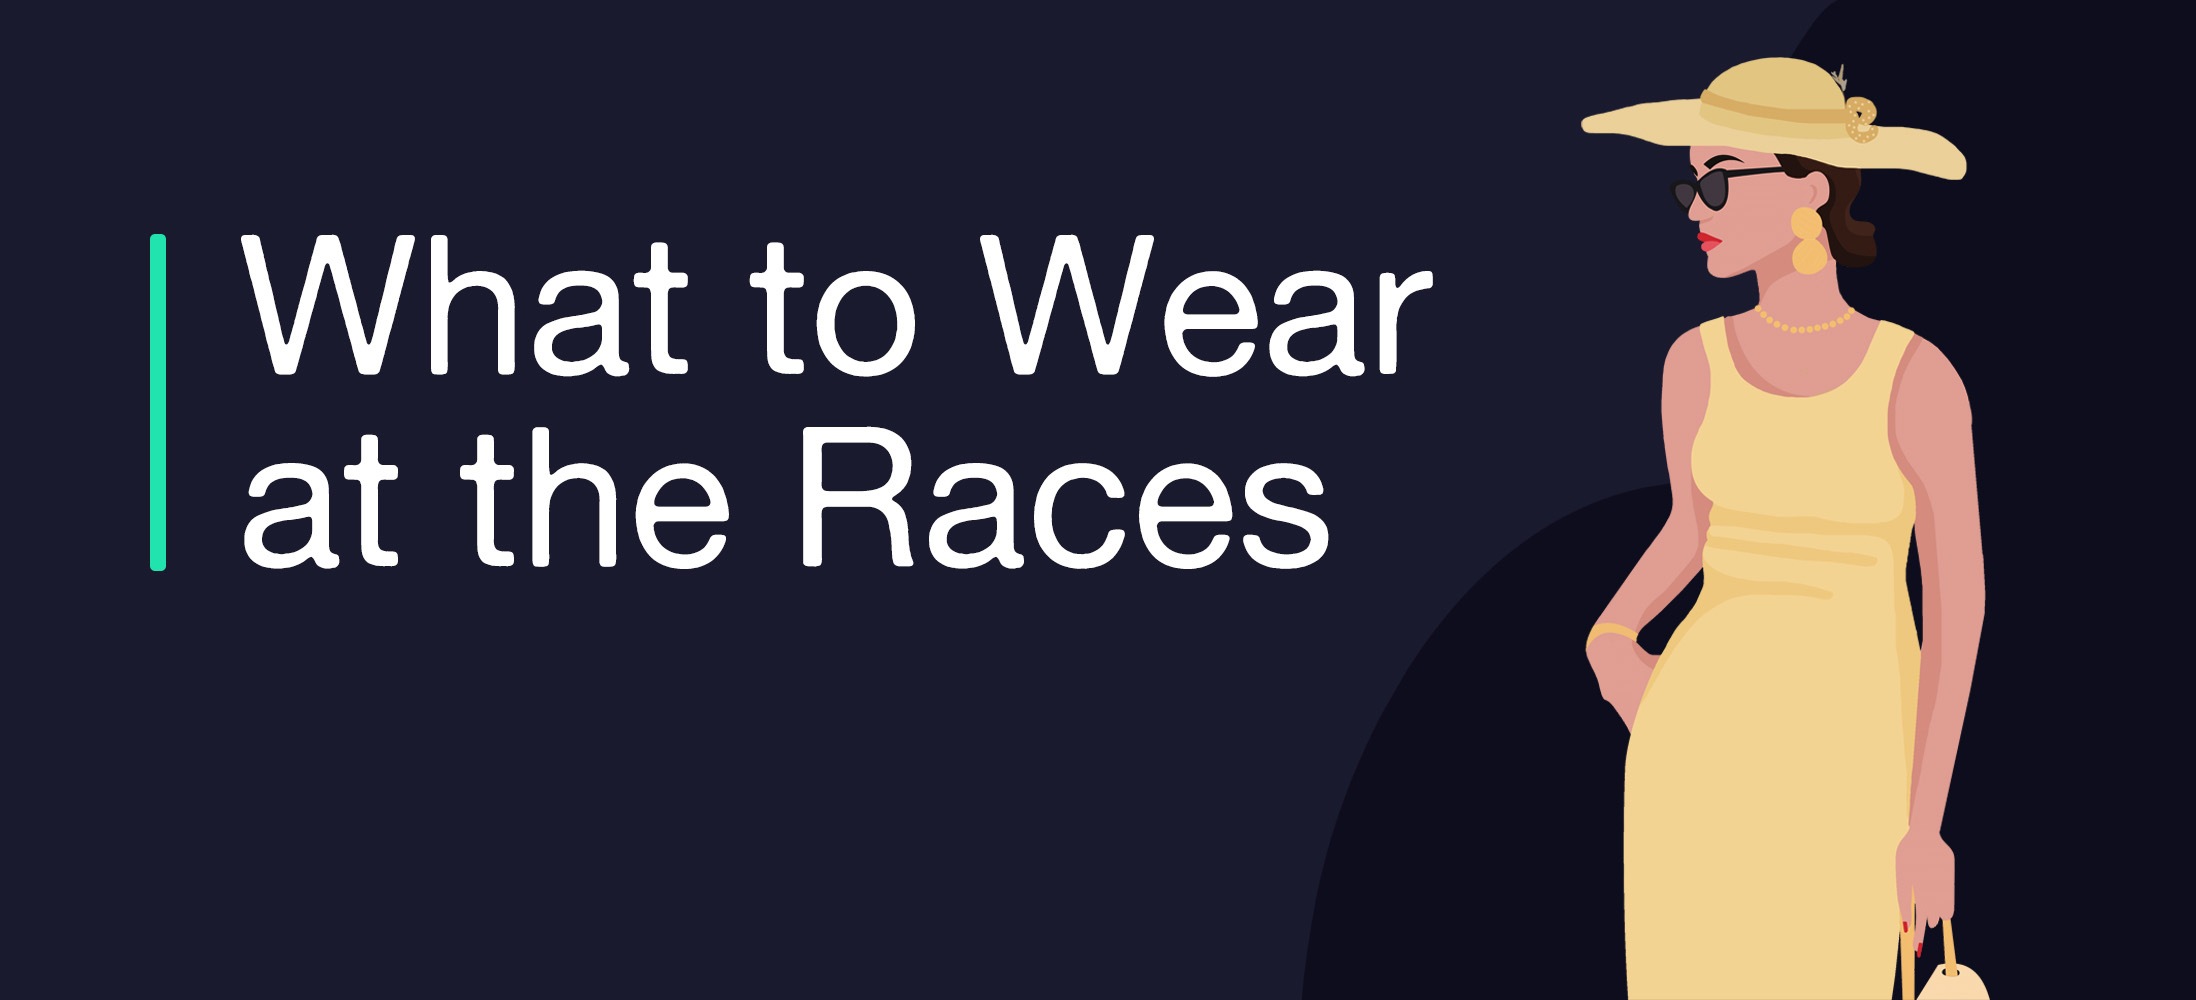 What to Wear at the Races